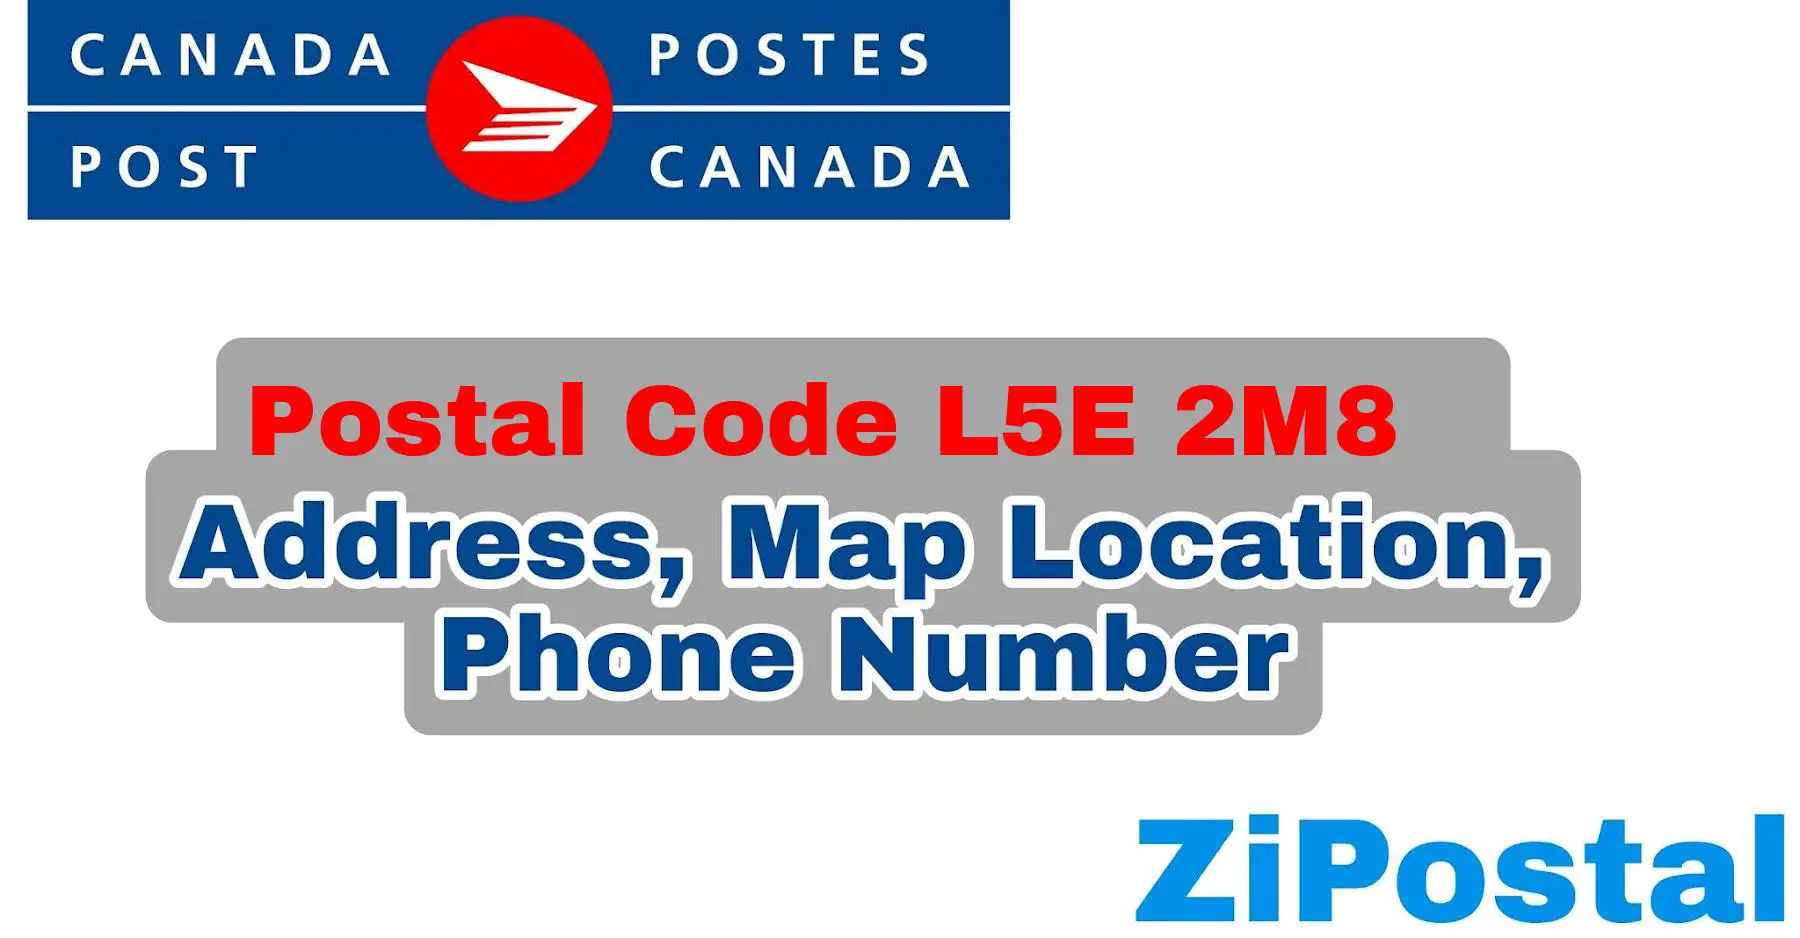 Postal Code L5E 2M8 Address Map Location and Phone Number